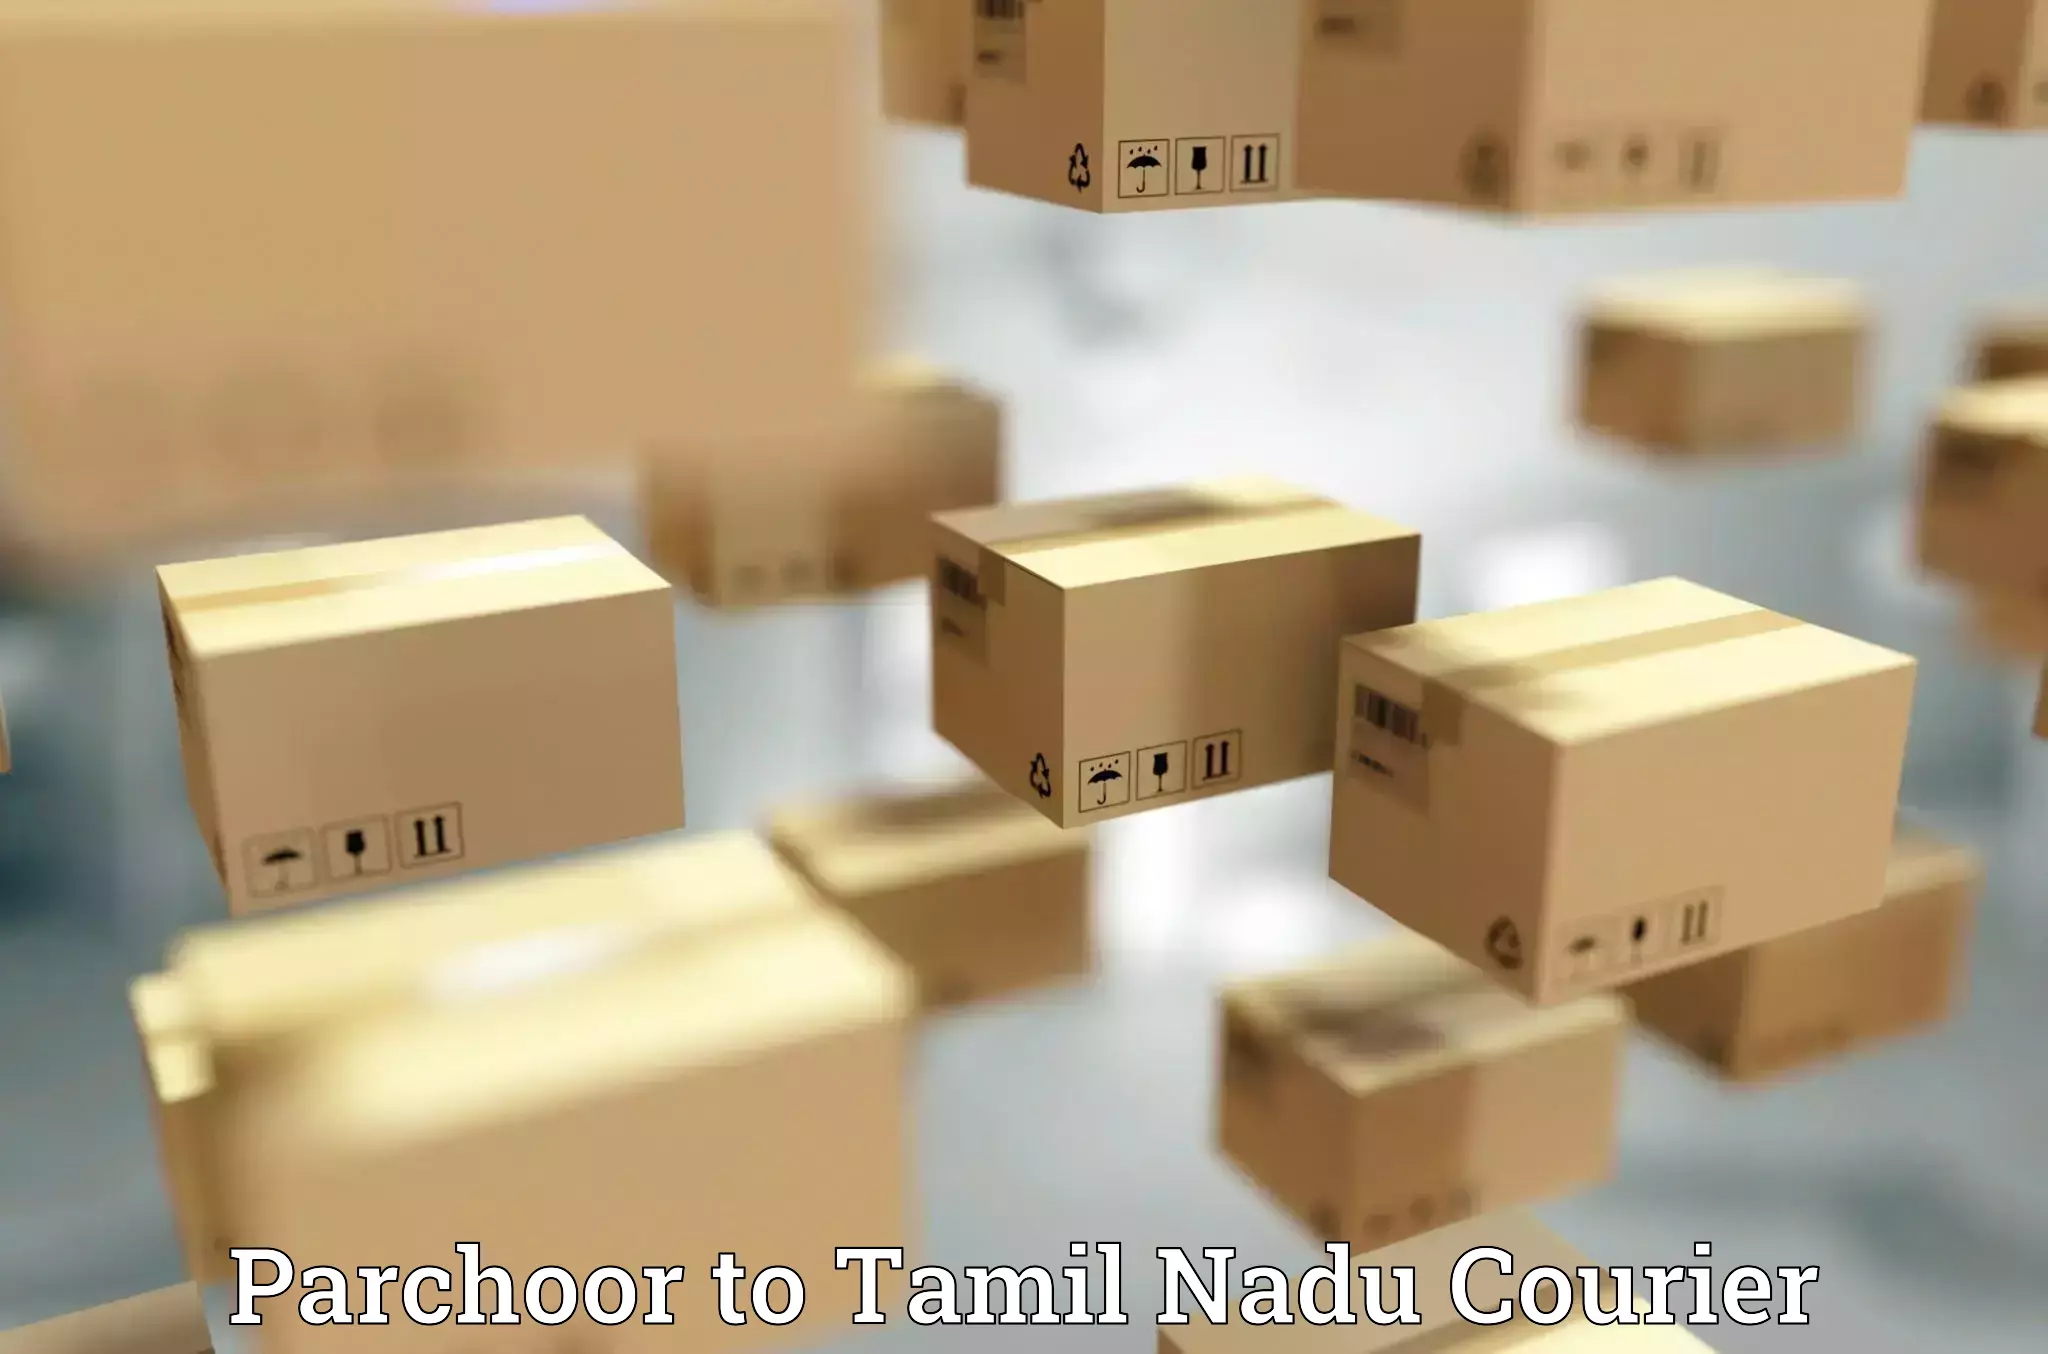 Professional courier services Parchoor to Rajapalayam